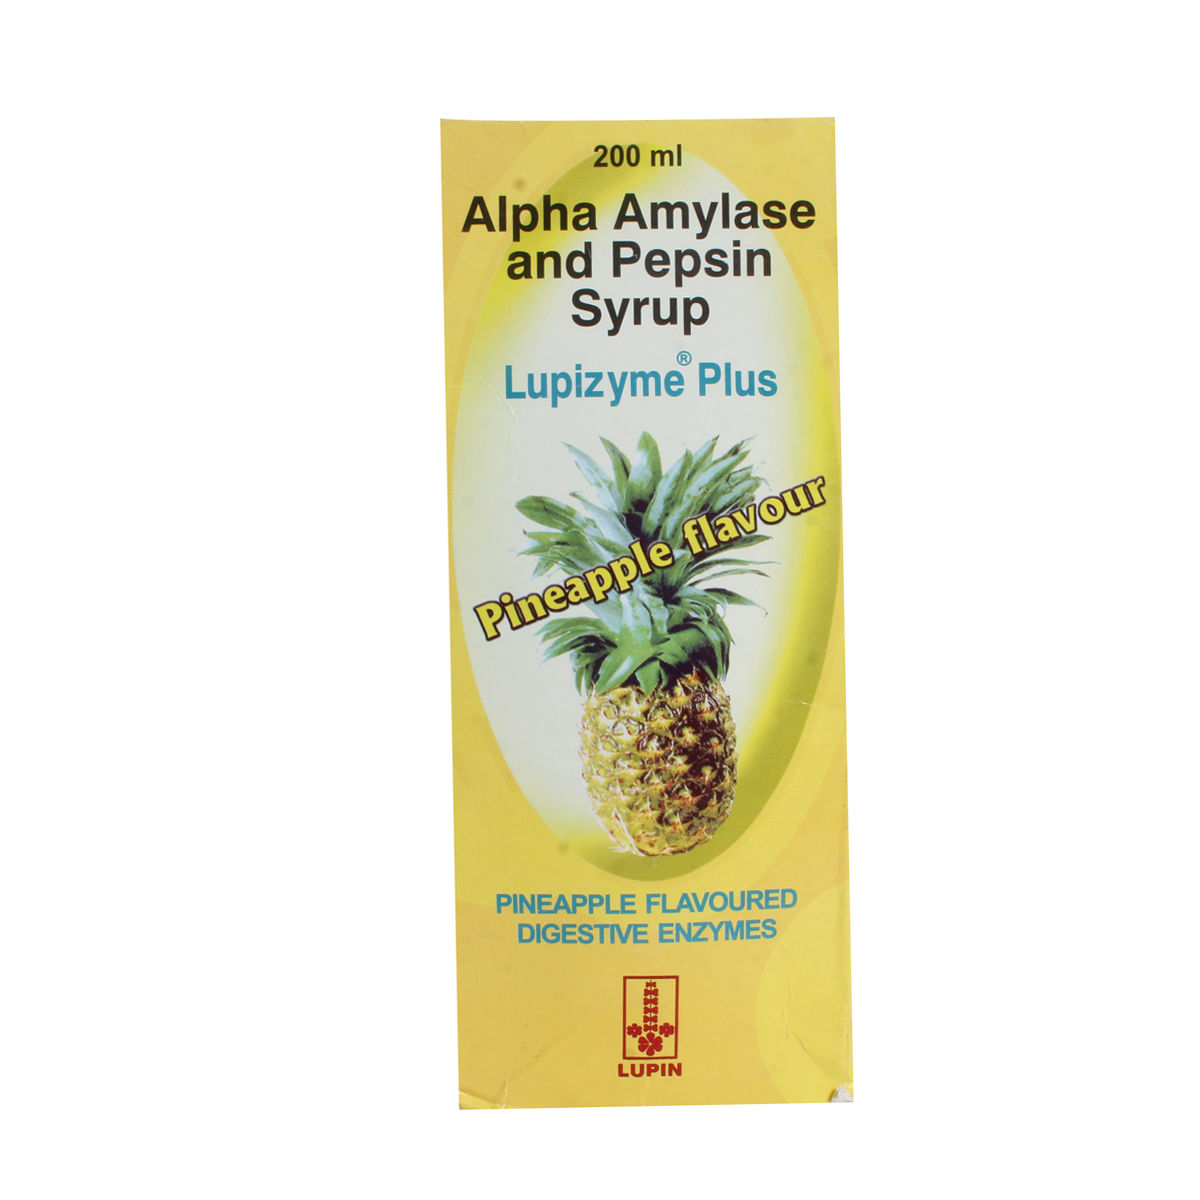 Lupizyme Plus Pineapple Syrup 200 ml, Pack of 1 SYRUP